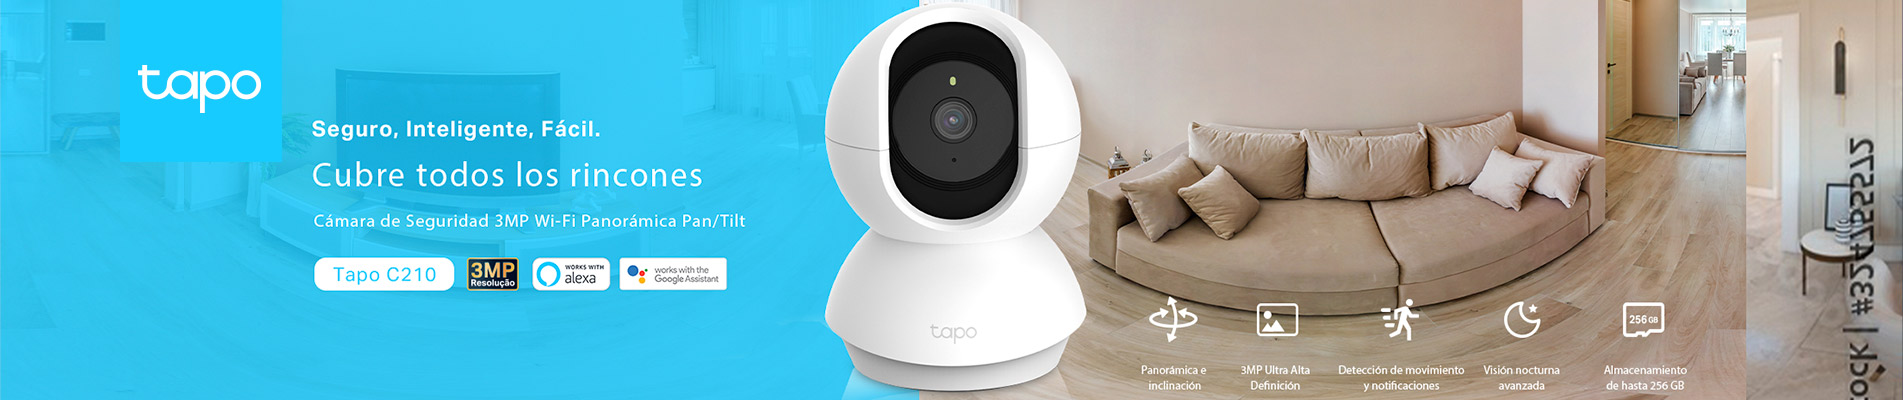 Tapo tp-link